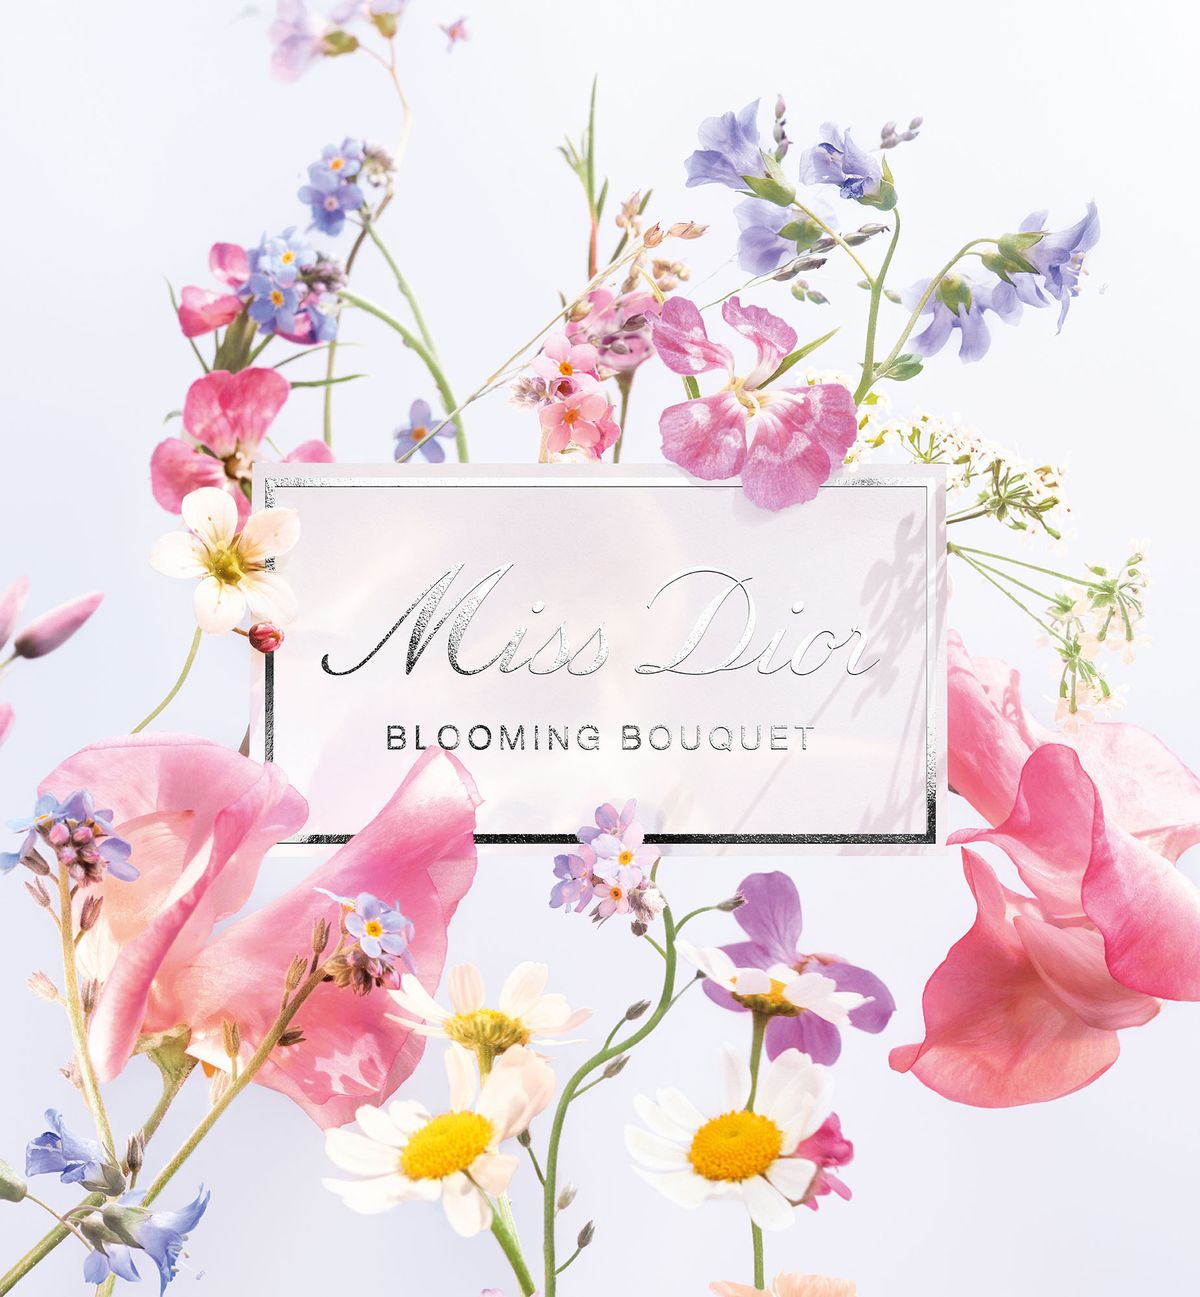 Miss-Dior-Blooming-Bouquet-50ml-05